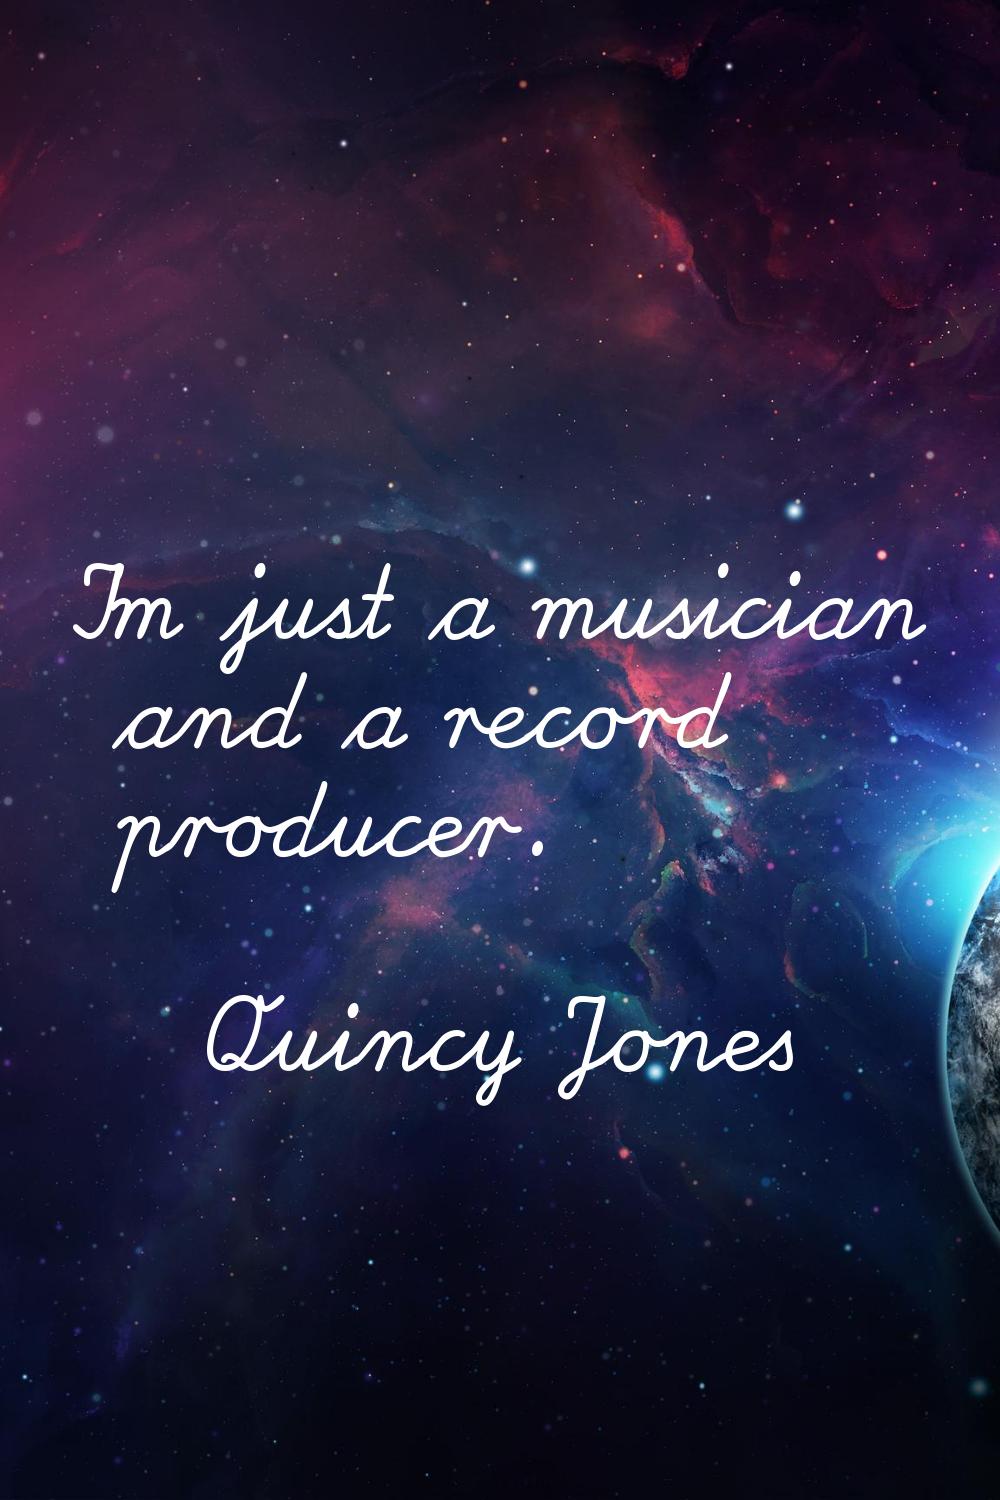 I'm just a musician and a record producer.